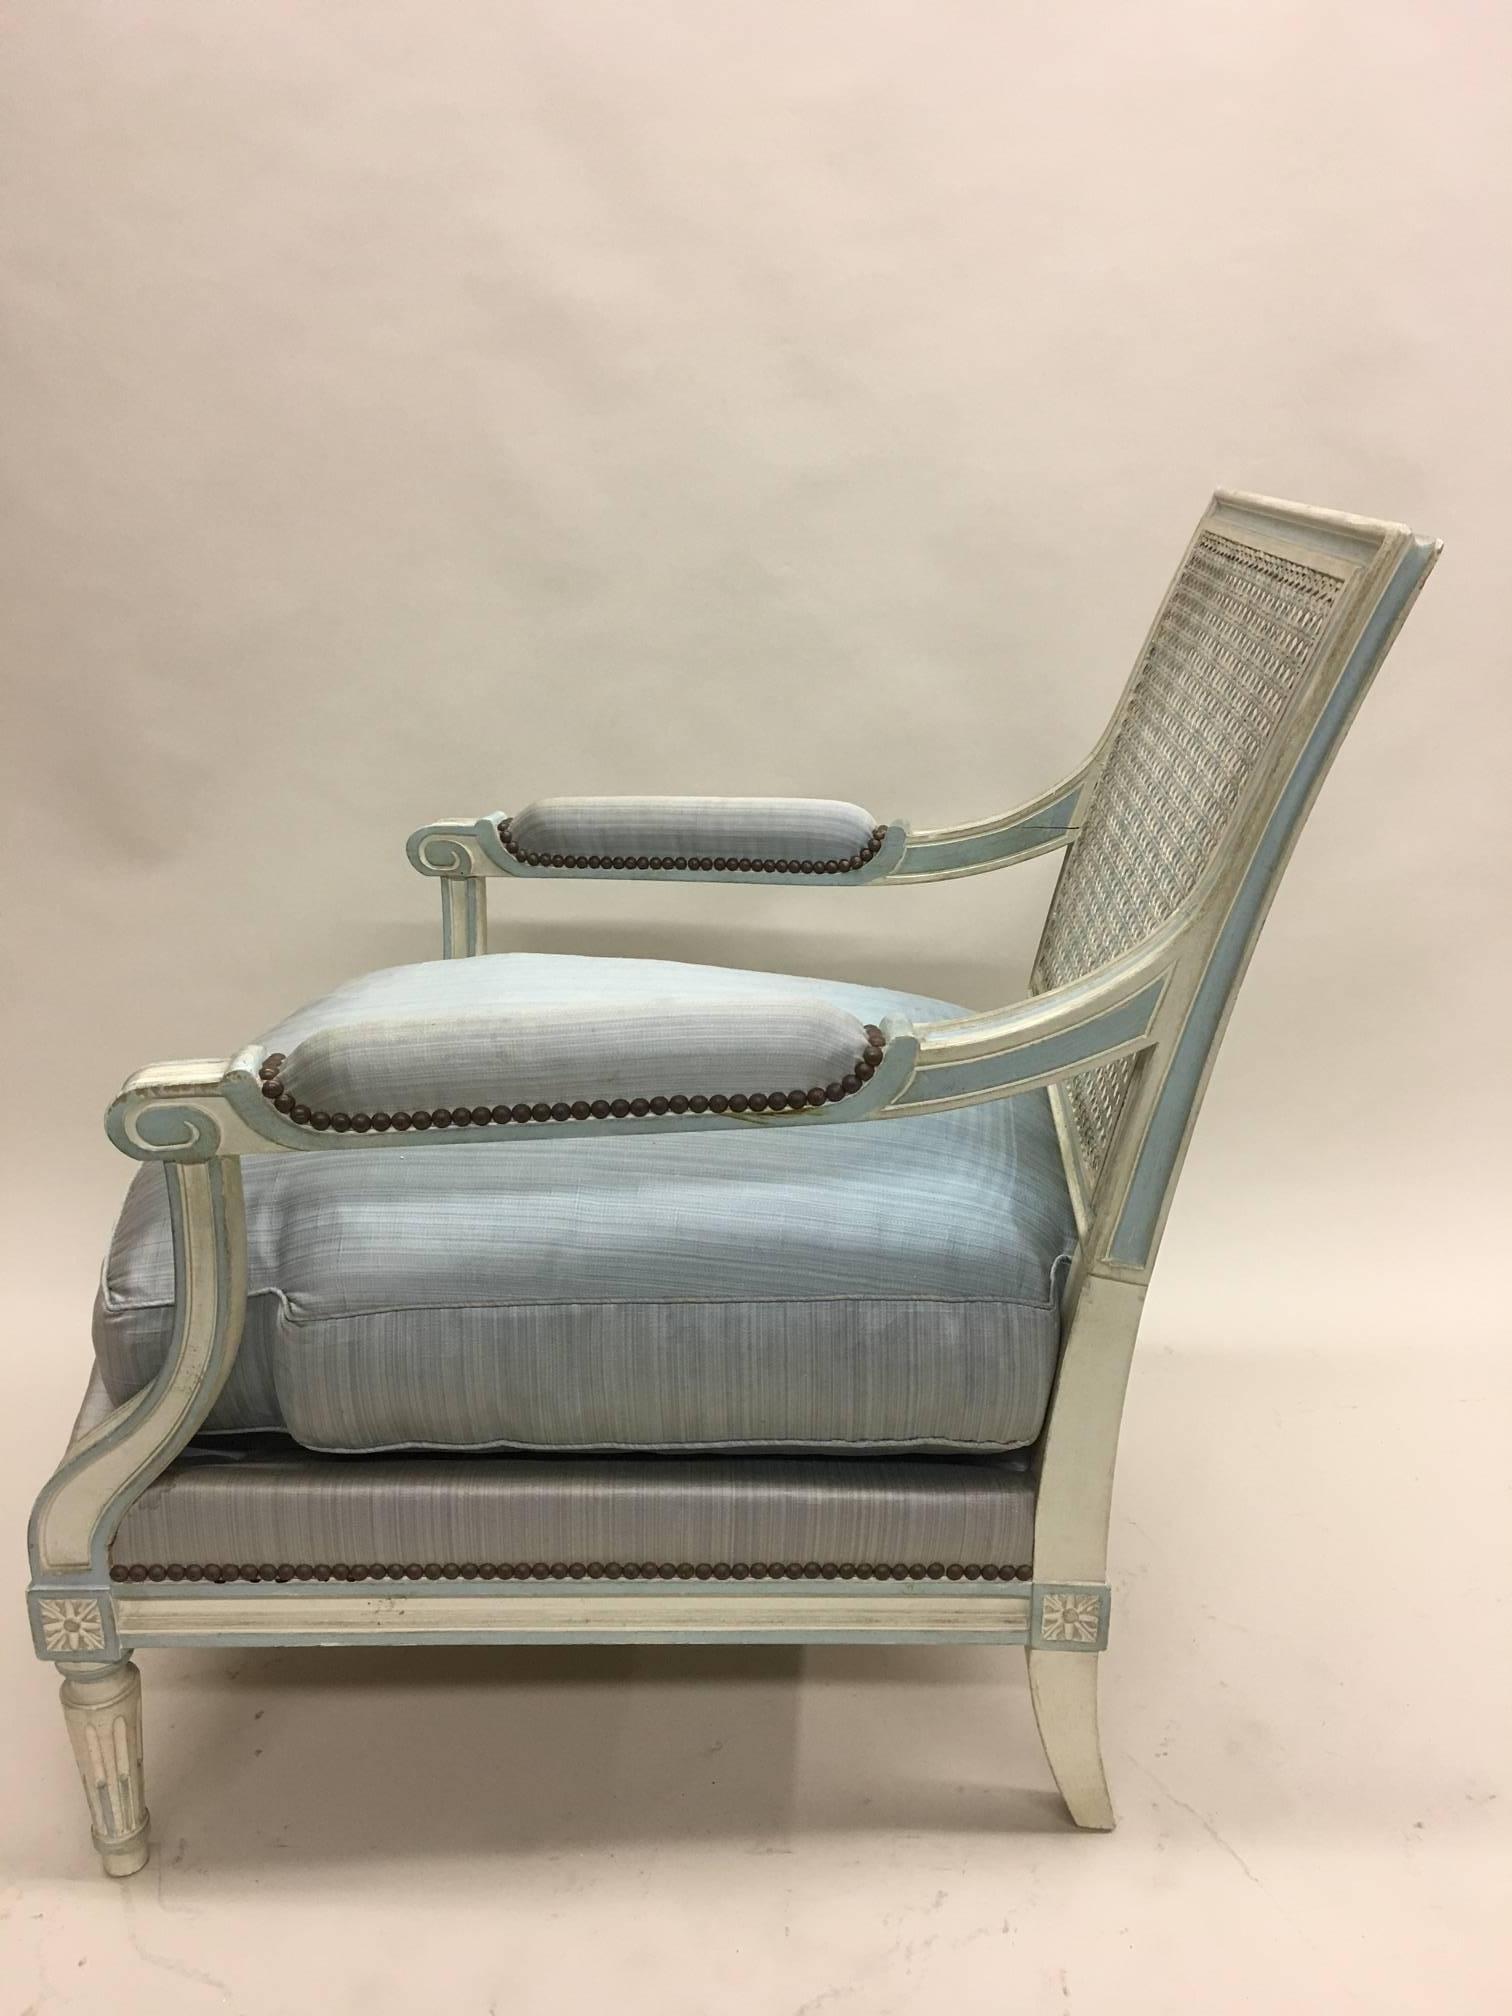 Elegant pair of Armchairs by Maison Jansen in the style of Louis XVI.

The chairs have hand carved frames and are made in similar fashion as their 18th century counterparts. The legs are fluted and tapered. The backrest is in rattan and features